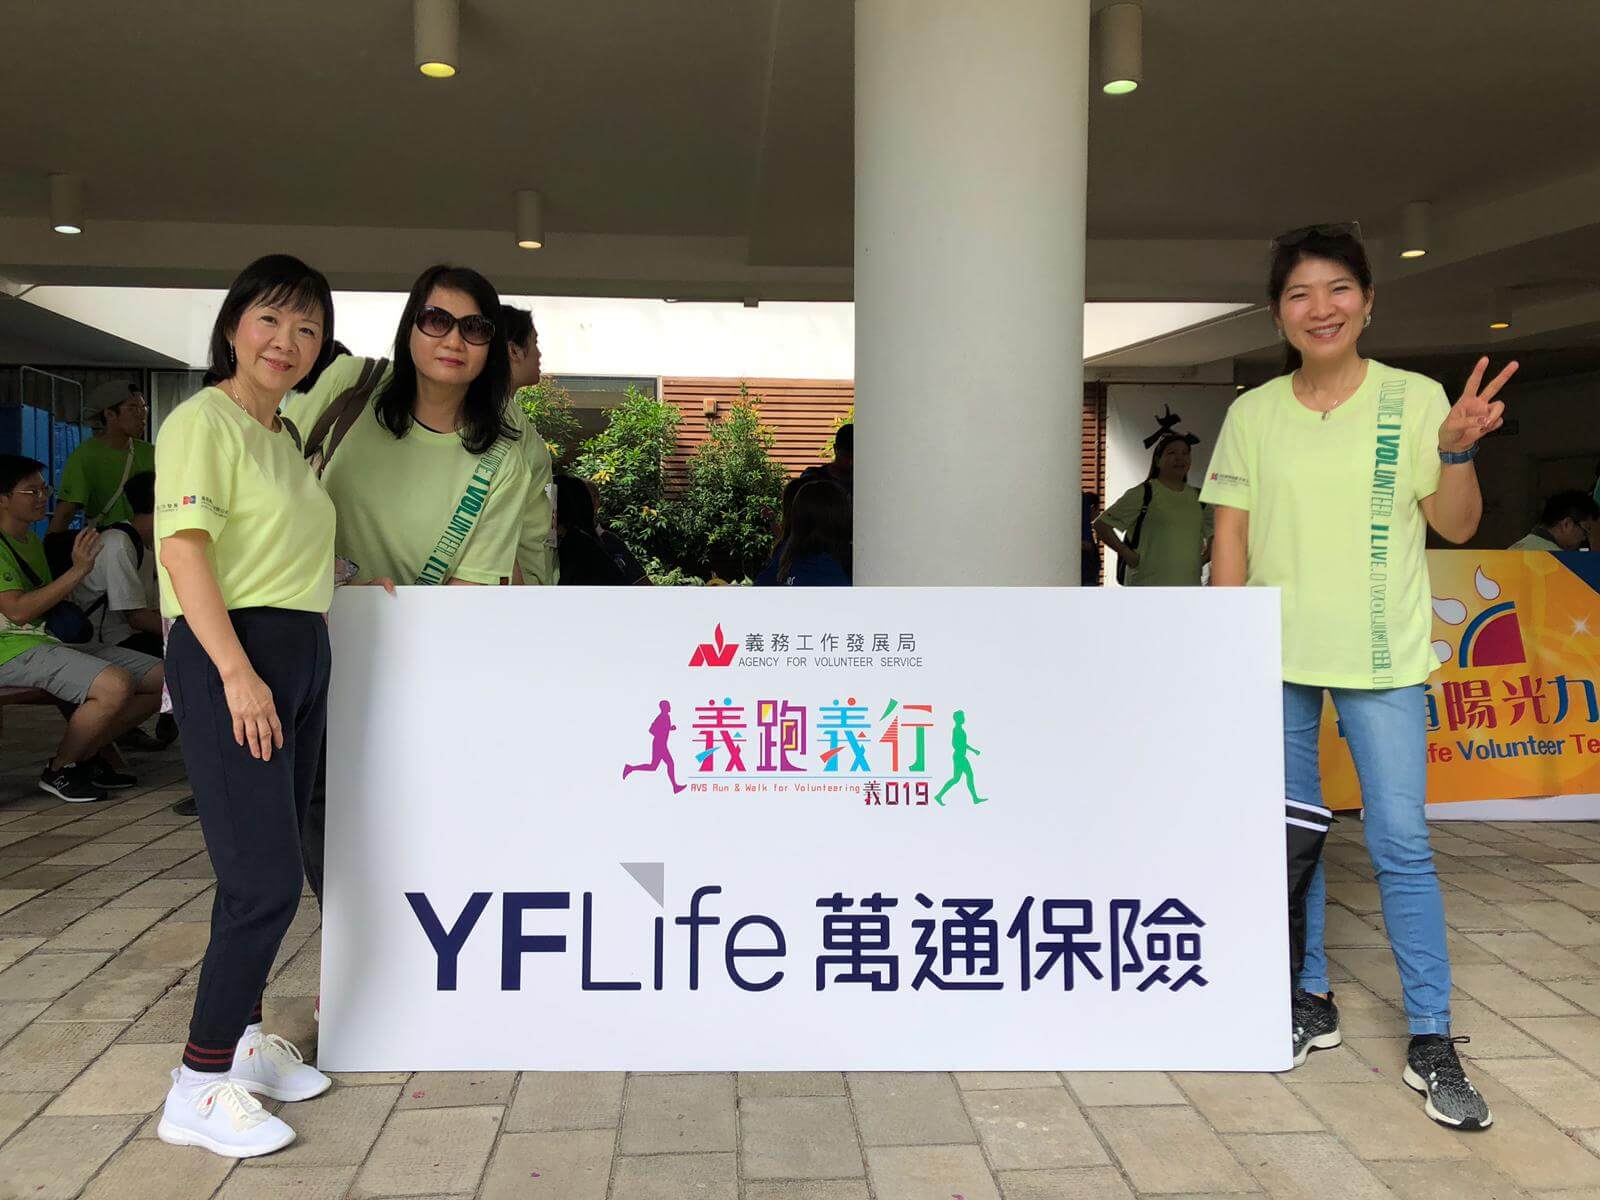 Consultants of YF Life had shown their tremendous support to the event! 